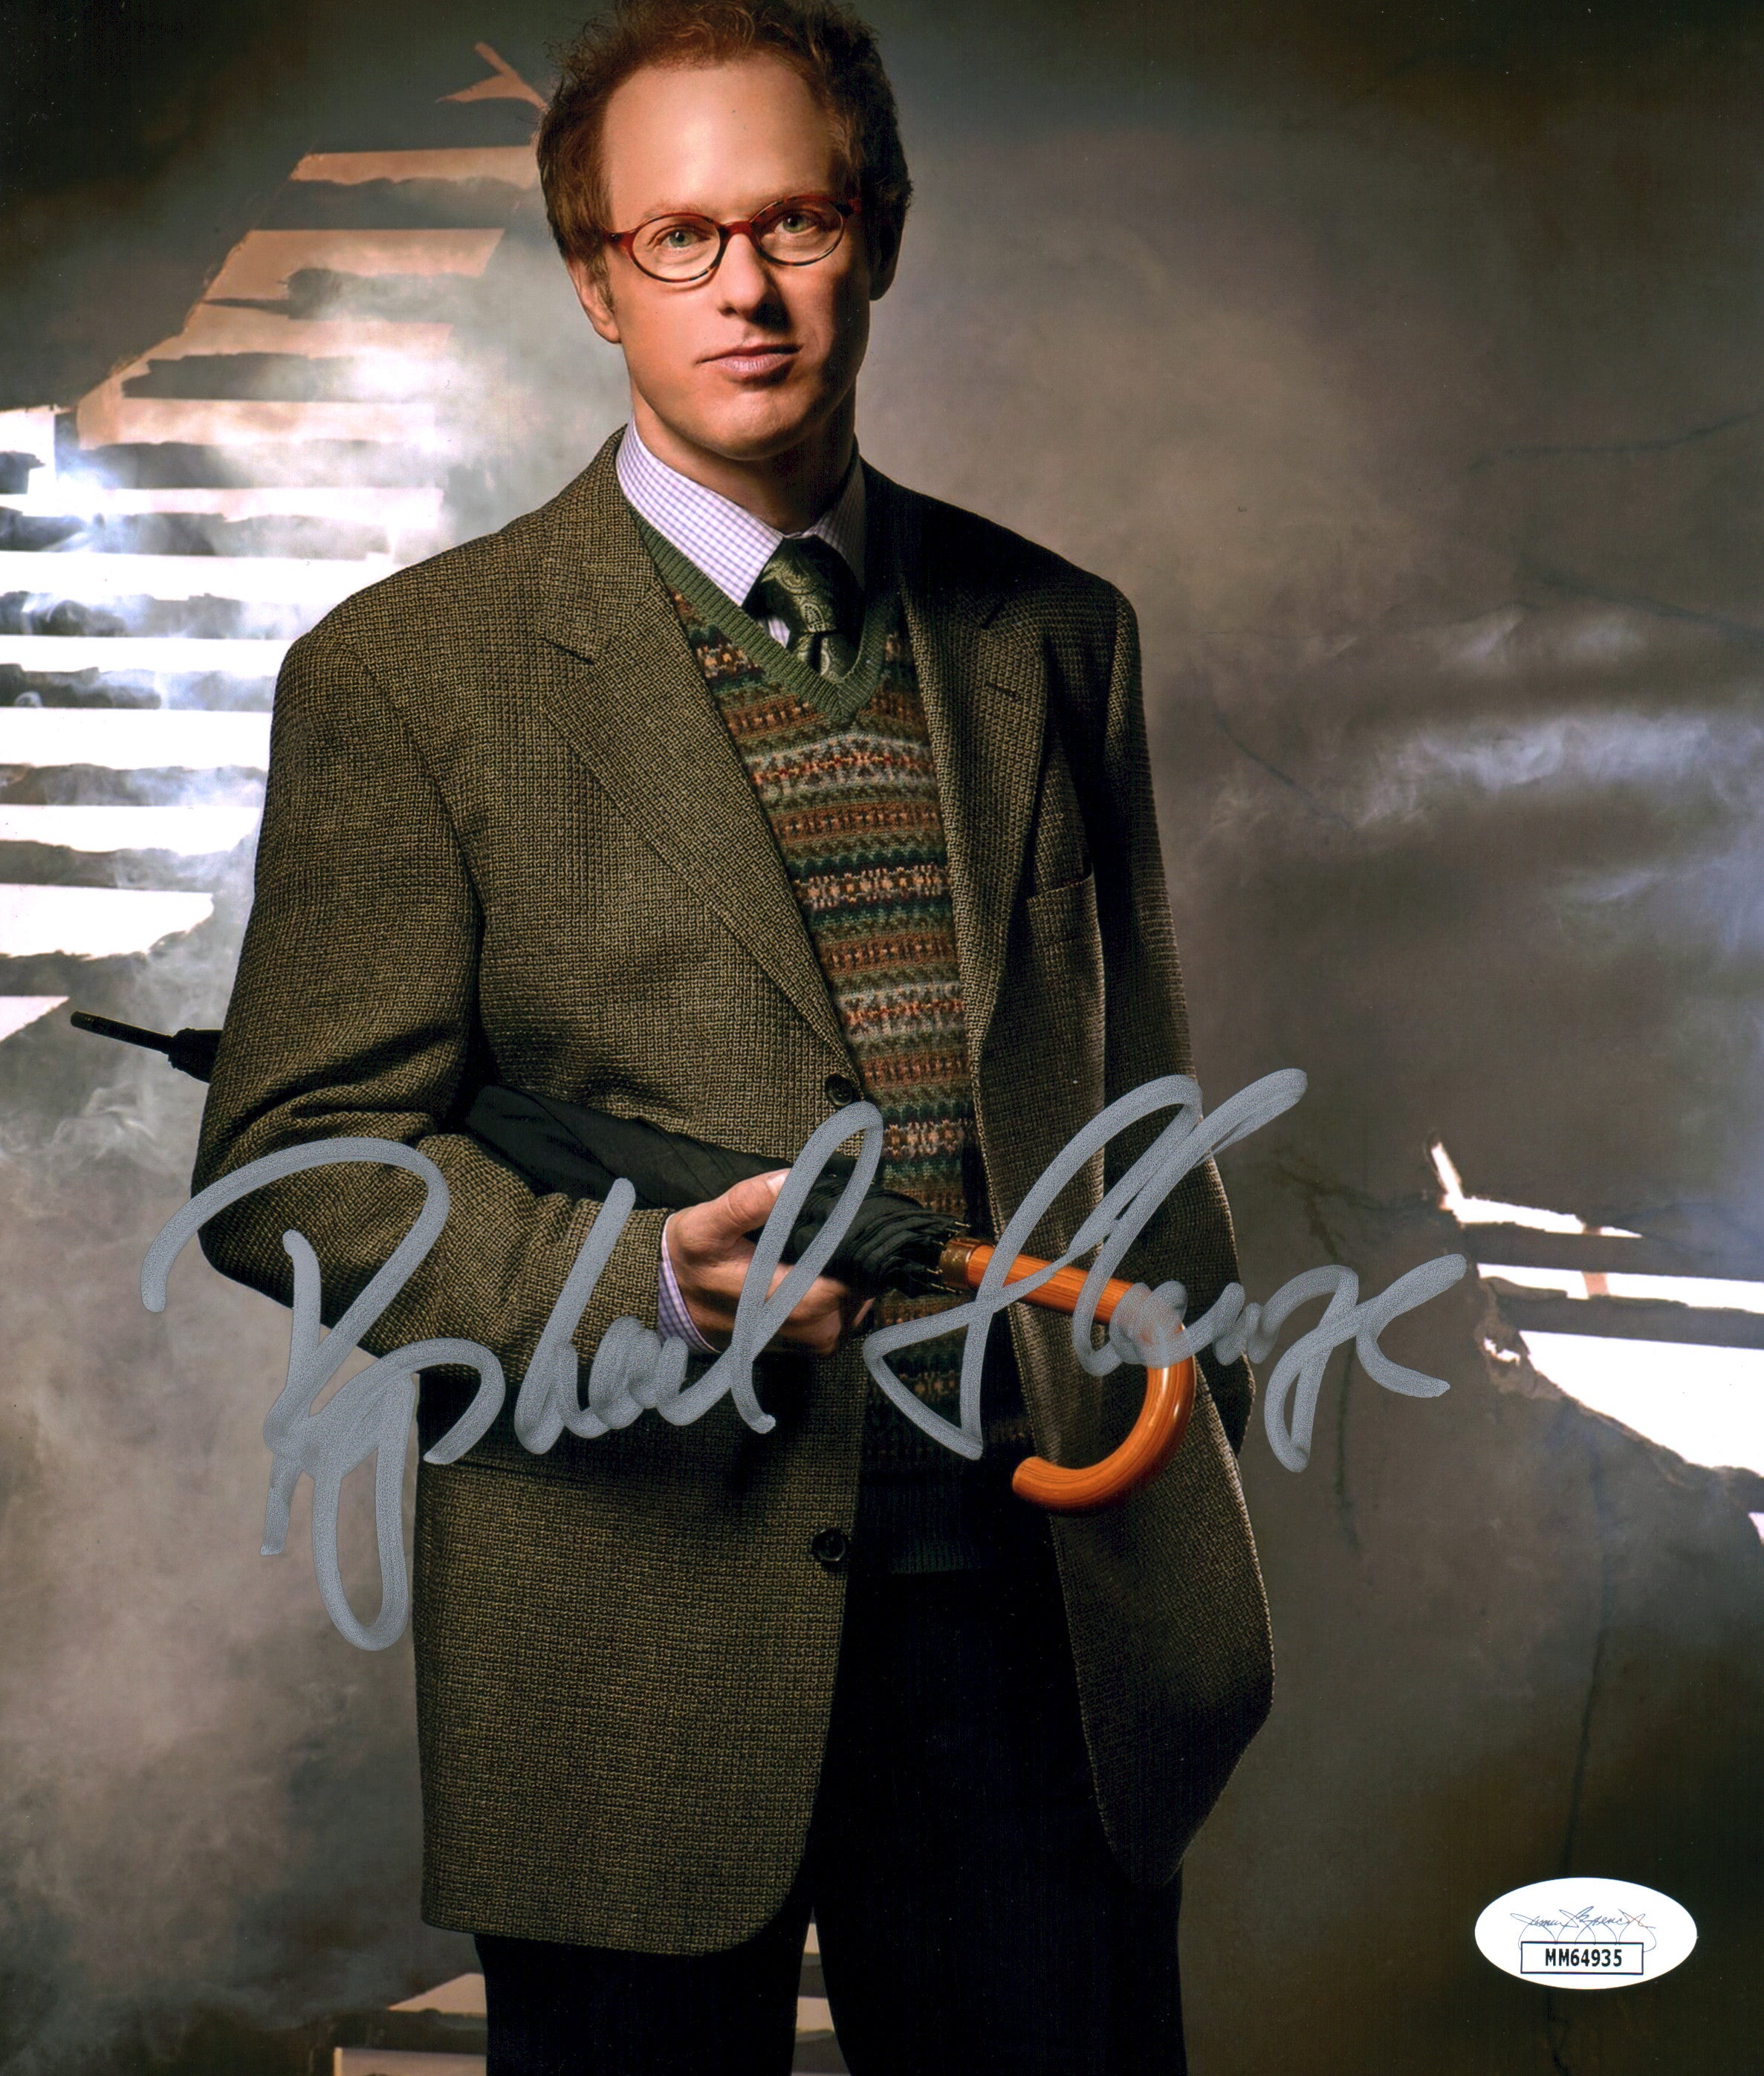 Raphael Sbarge Once Upon A Time 8x10 Signed Photo JSA Certified Autograph GalaxyCon